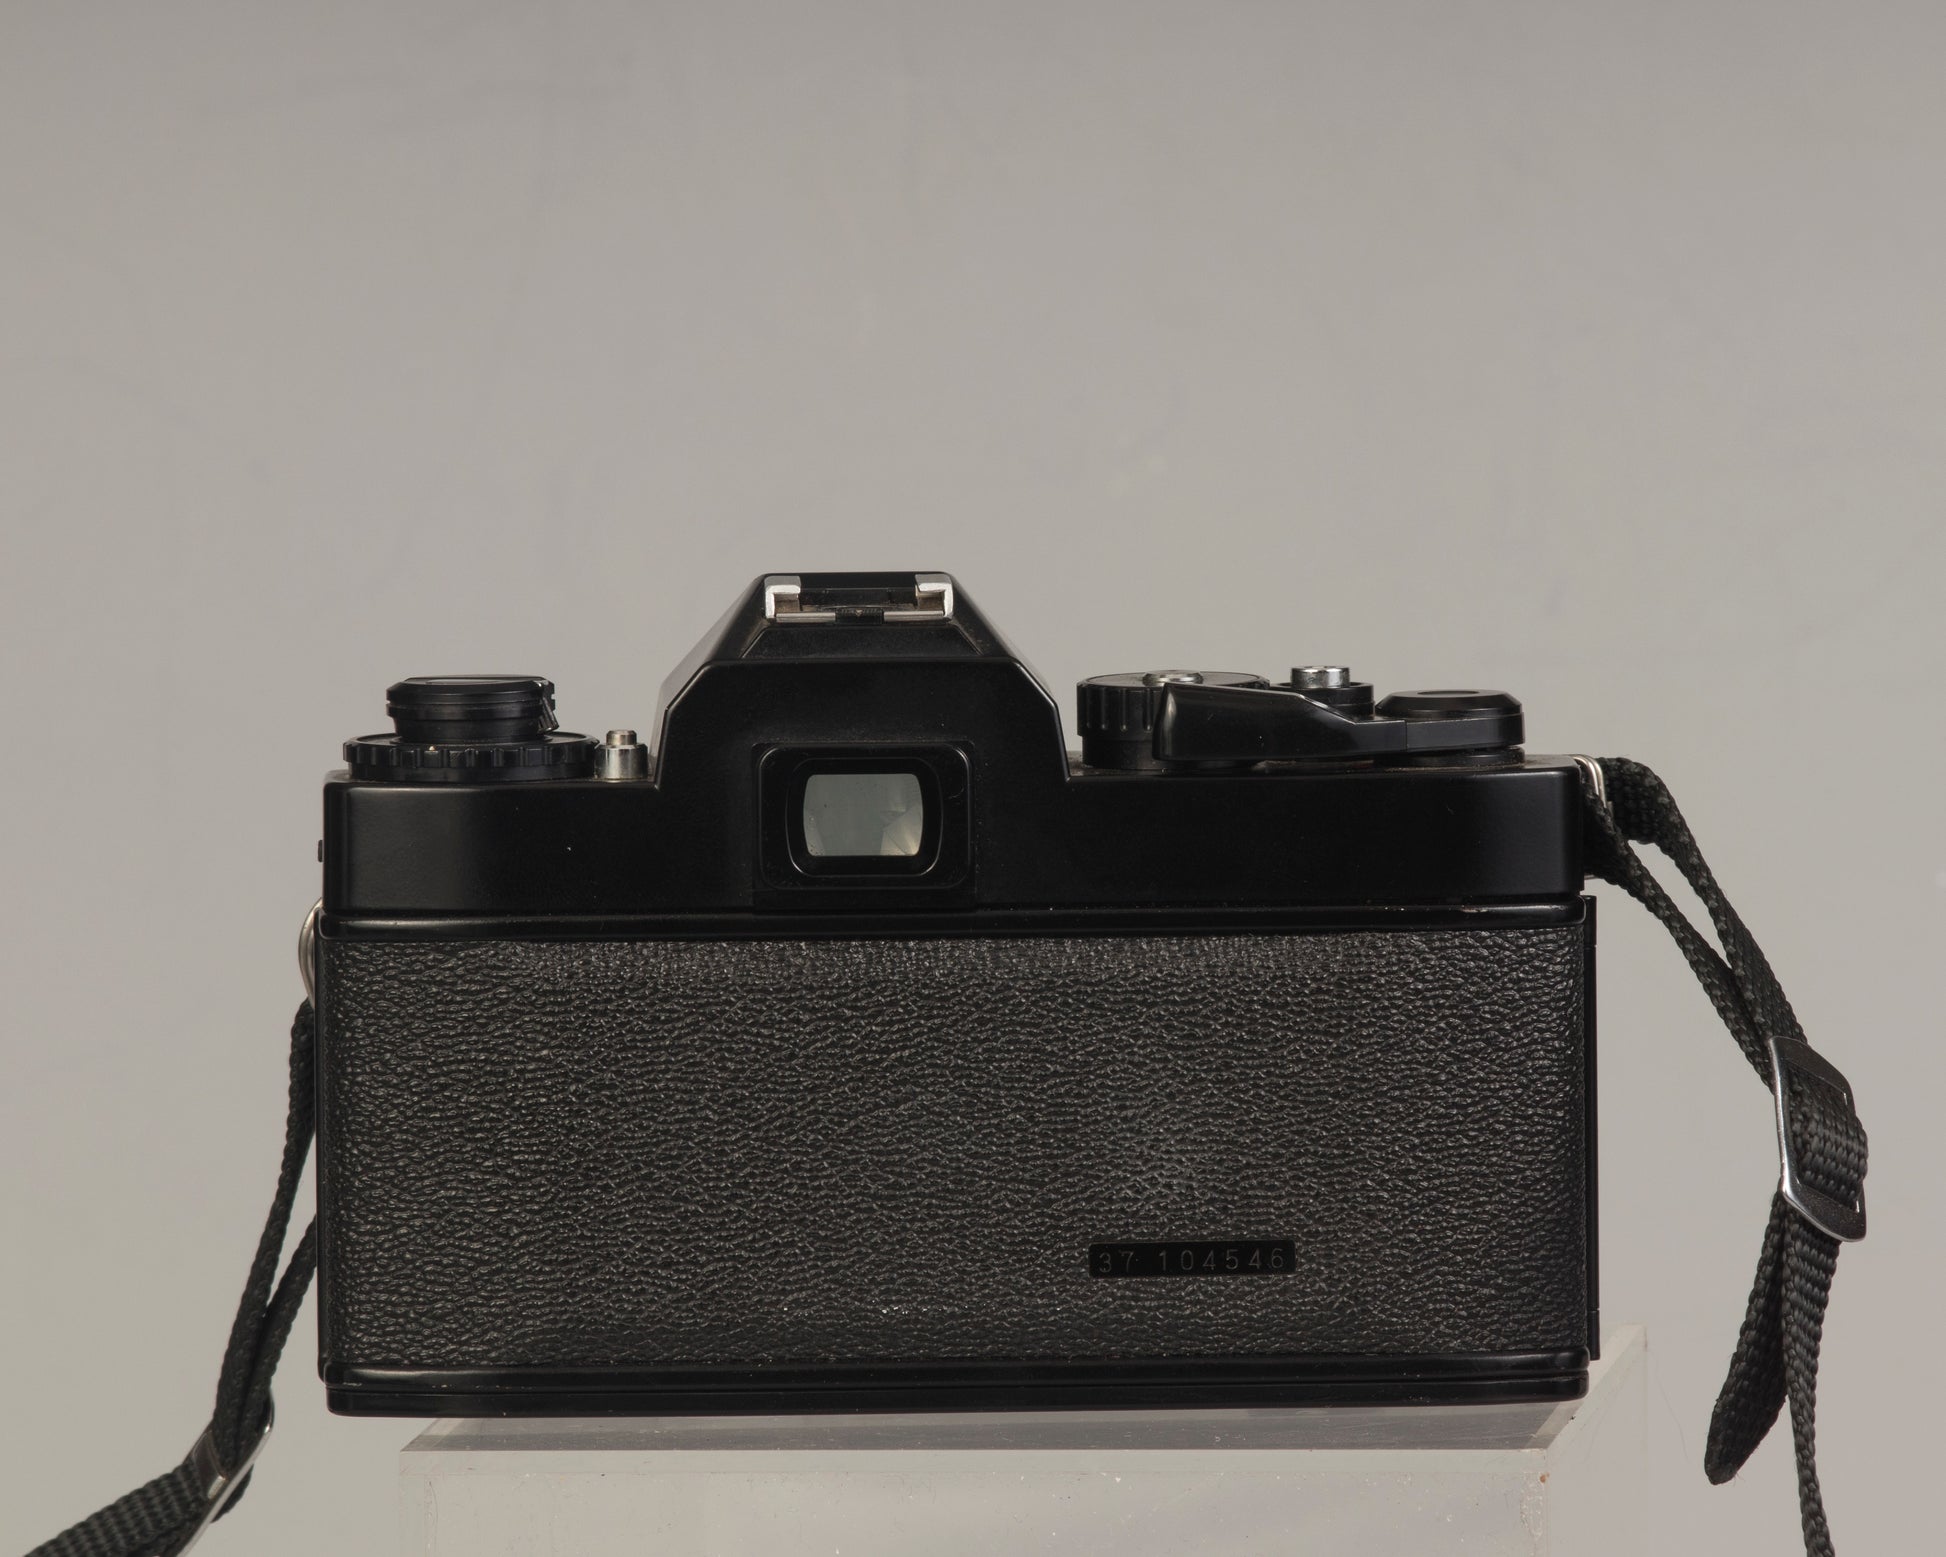 Ricoh XR-500 (aka KR-5) with Auto Sears MC 50mm f1.7 (a rebranded Ricoh lens) - back view